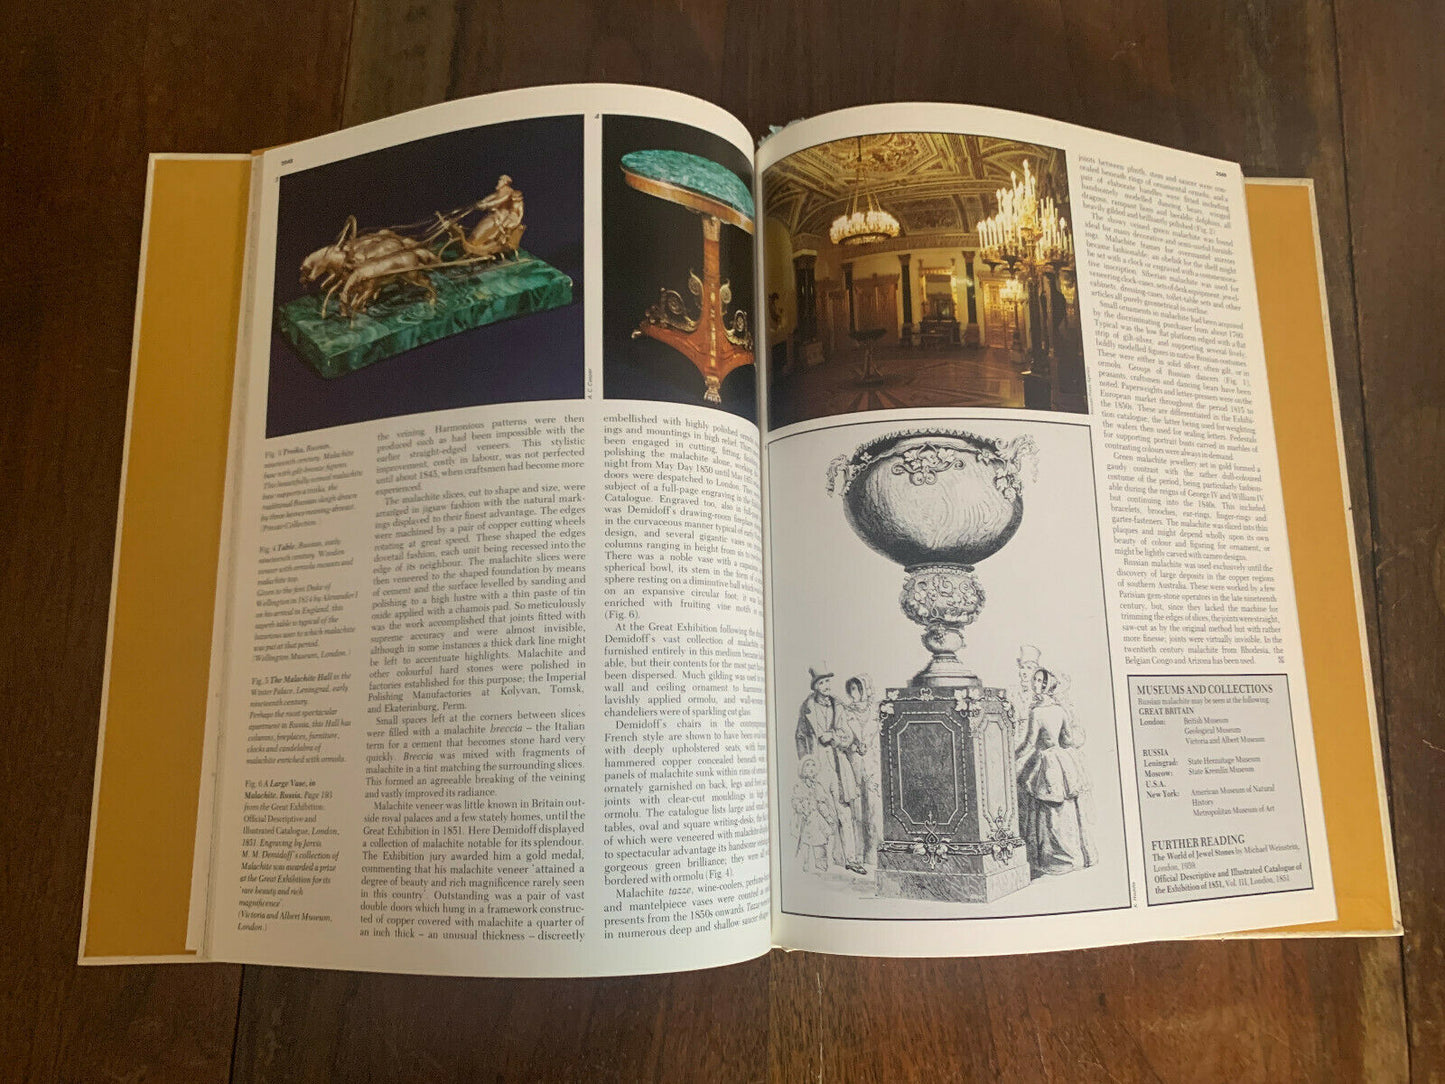 Discovering Antiques The Story of World Antiques Volume 17 (1972-1973)